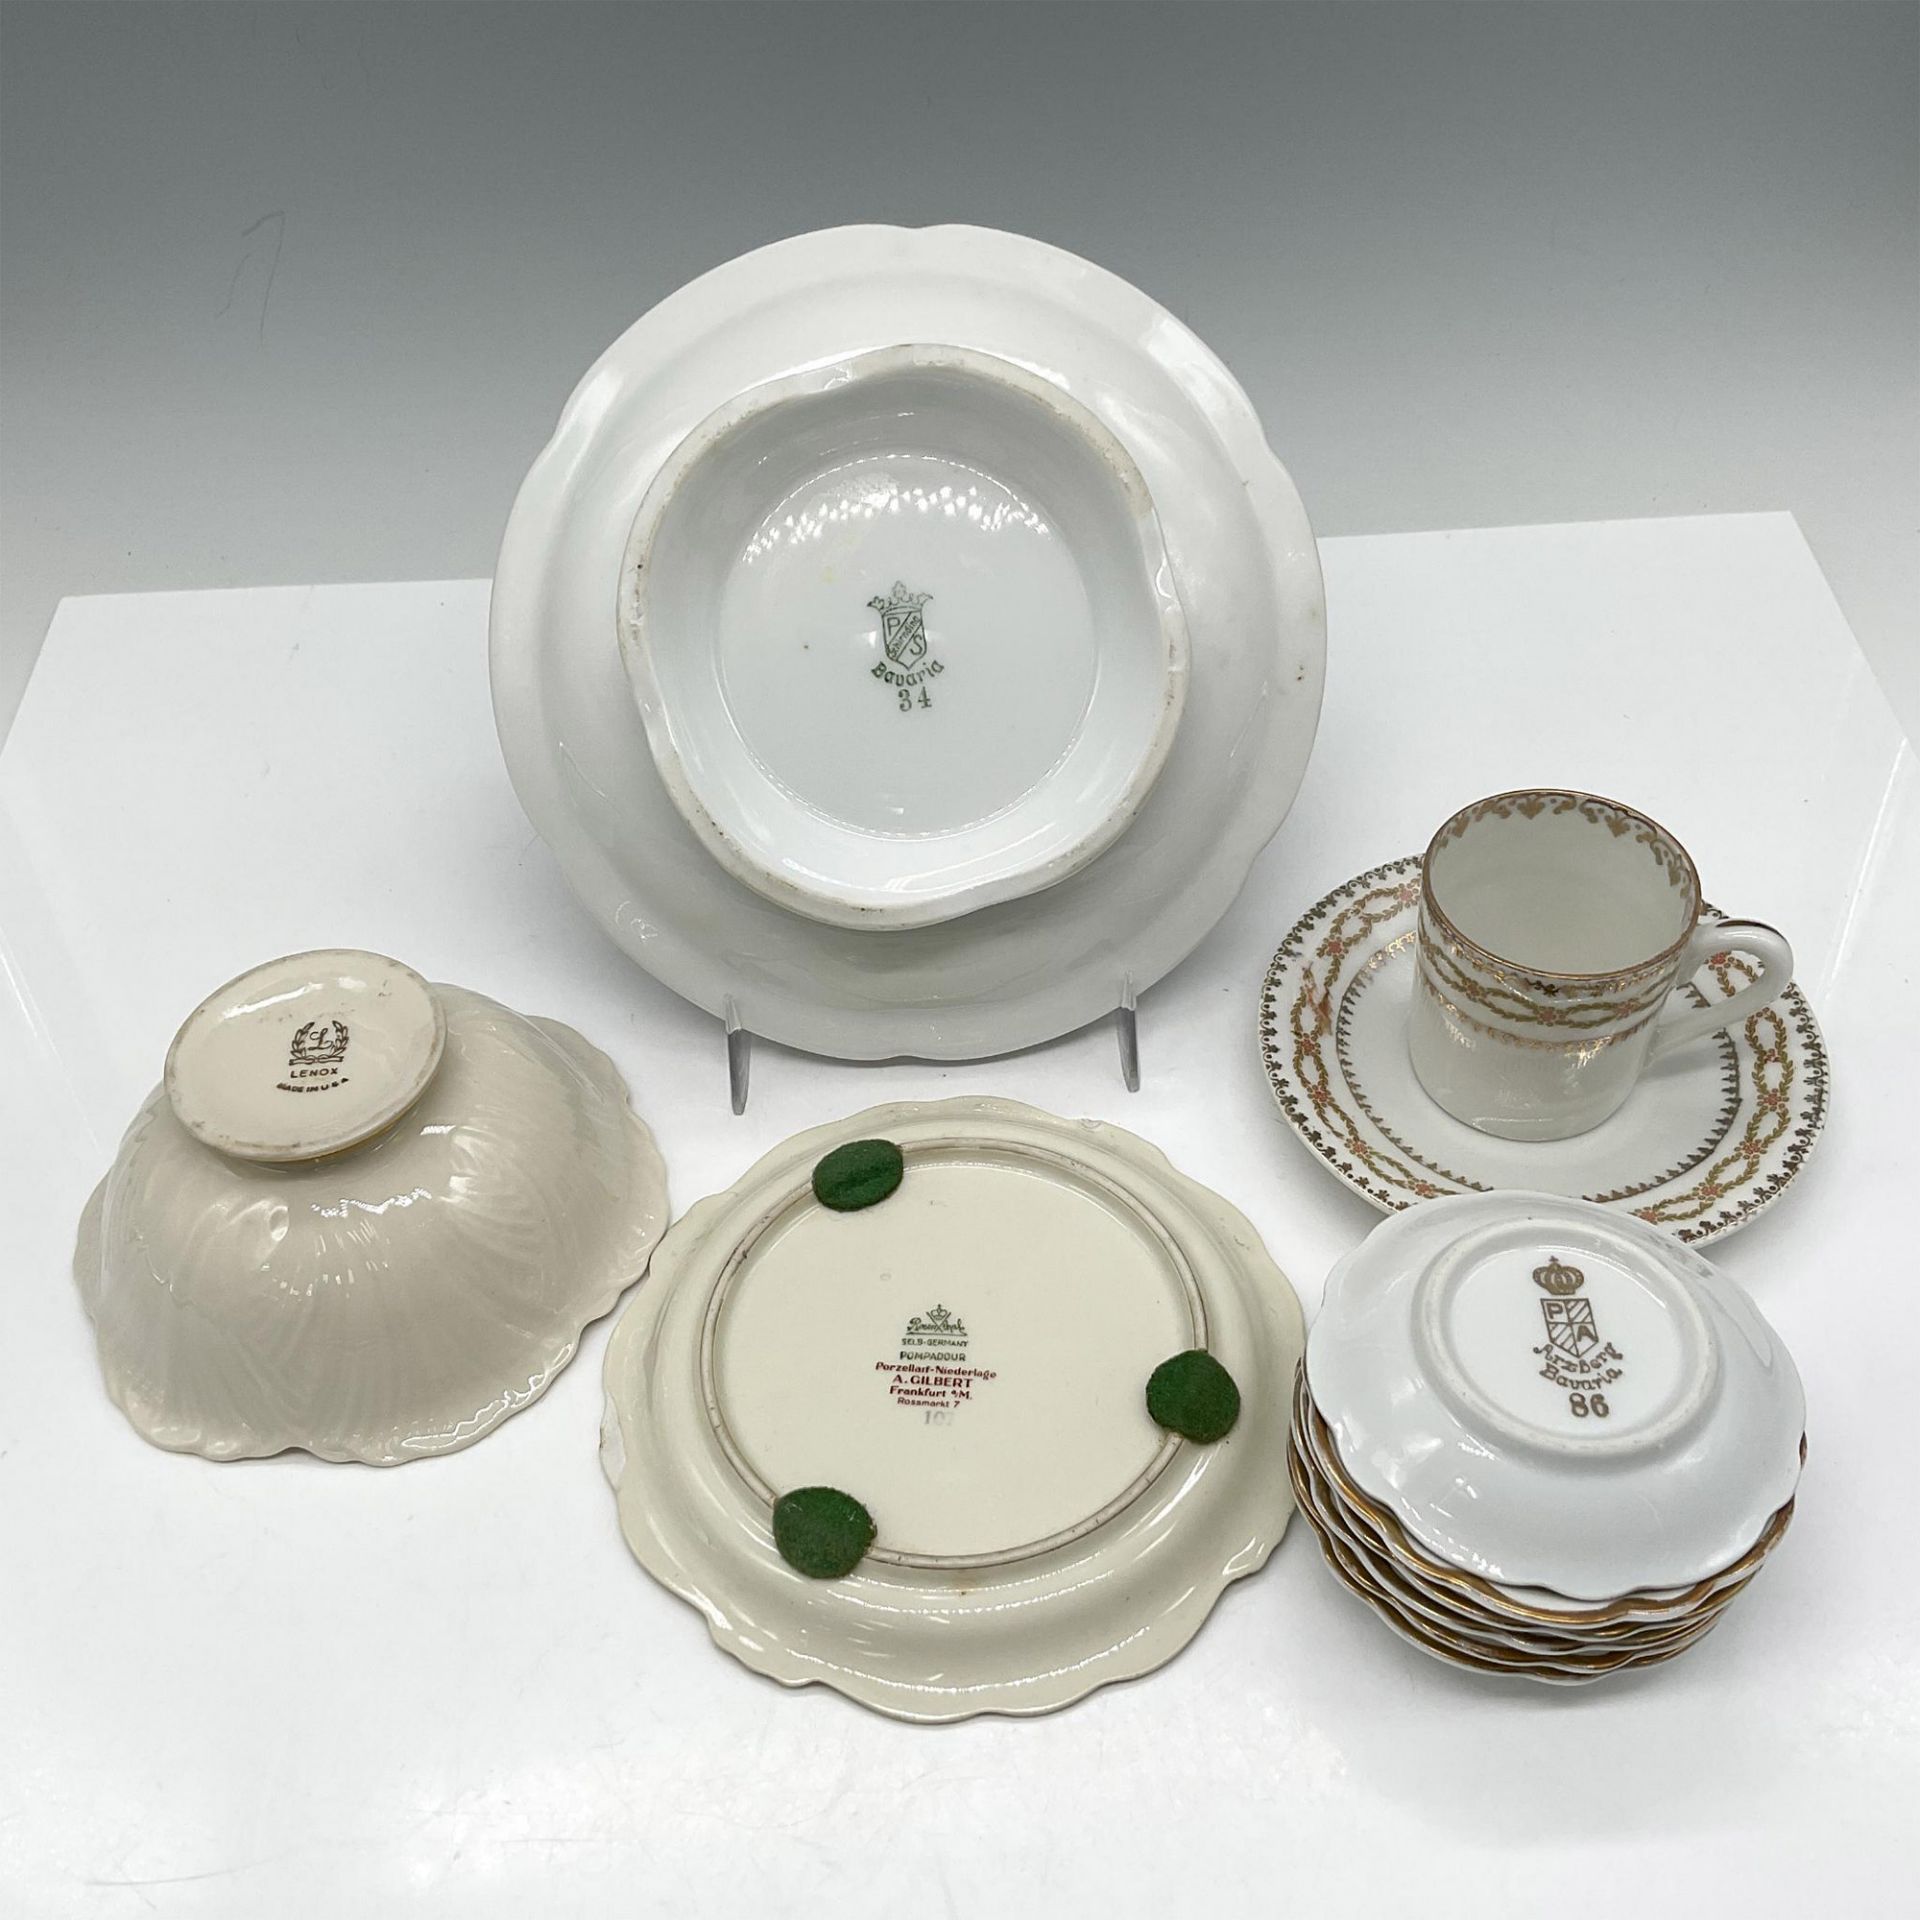 11pc Bavarian Mixed Porcelain Pieces - Image 2 of 2